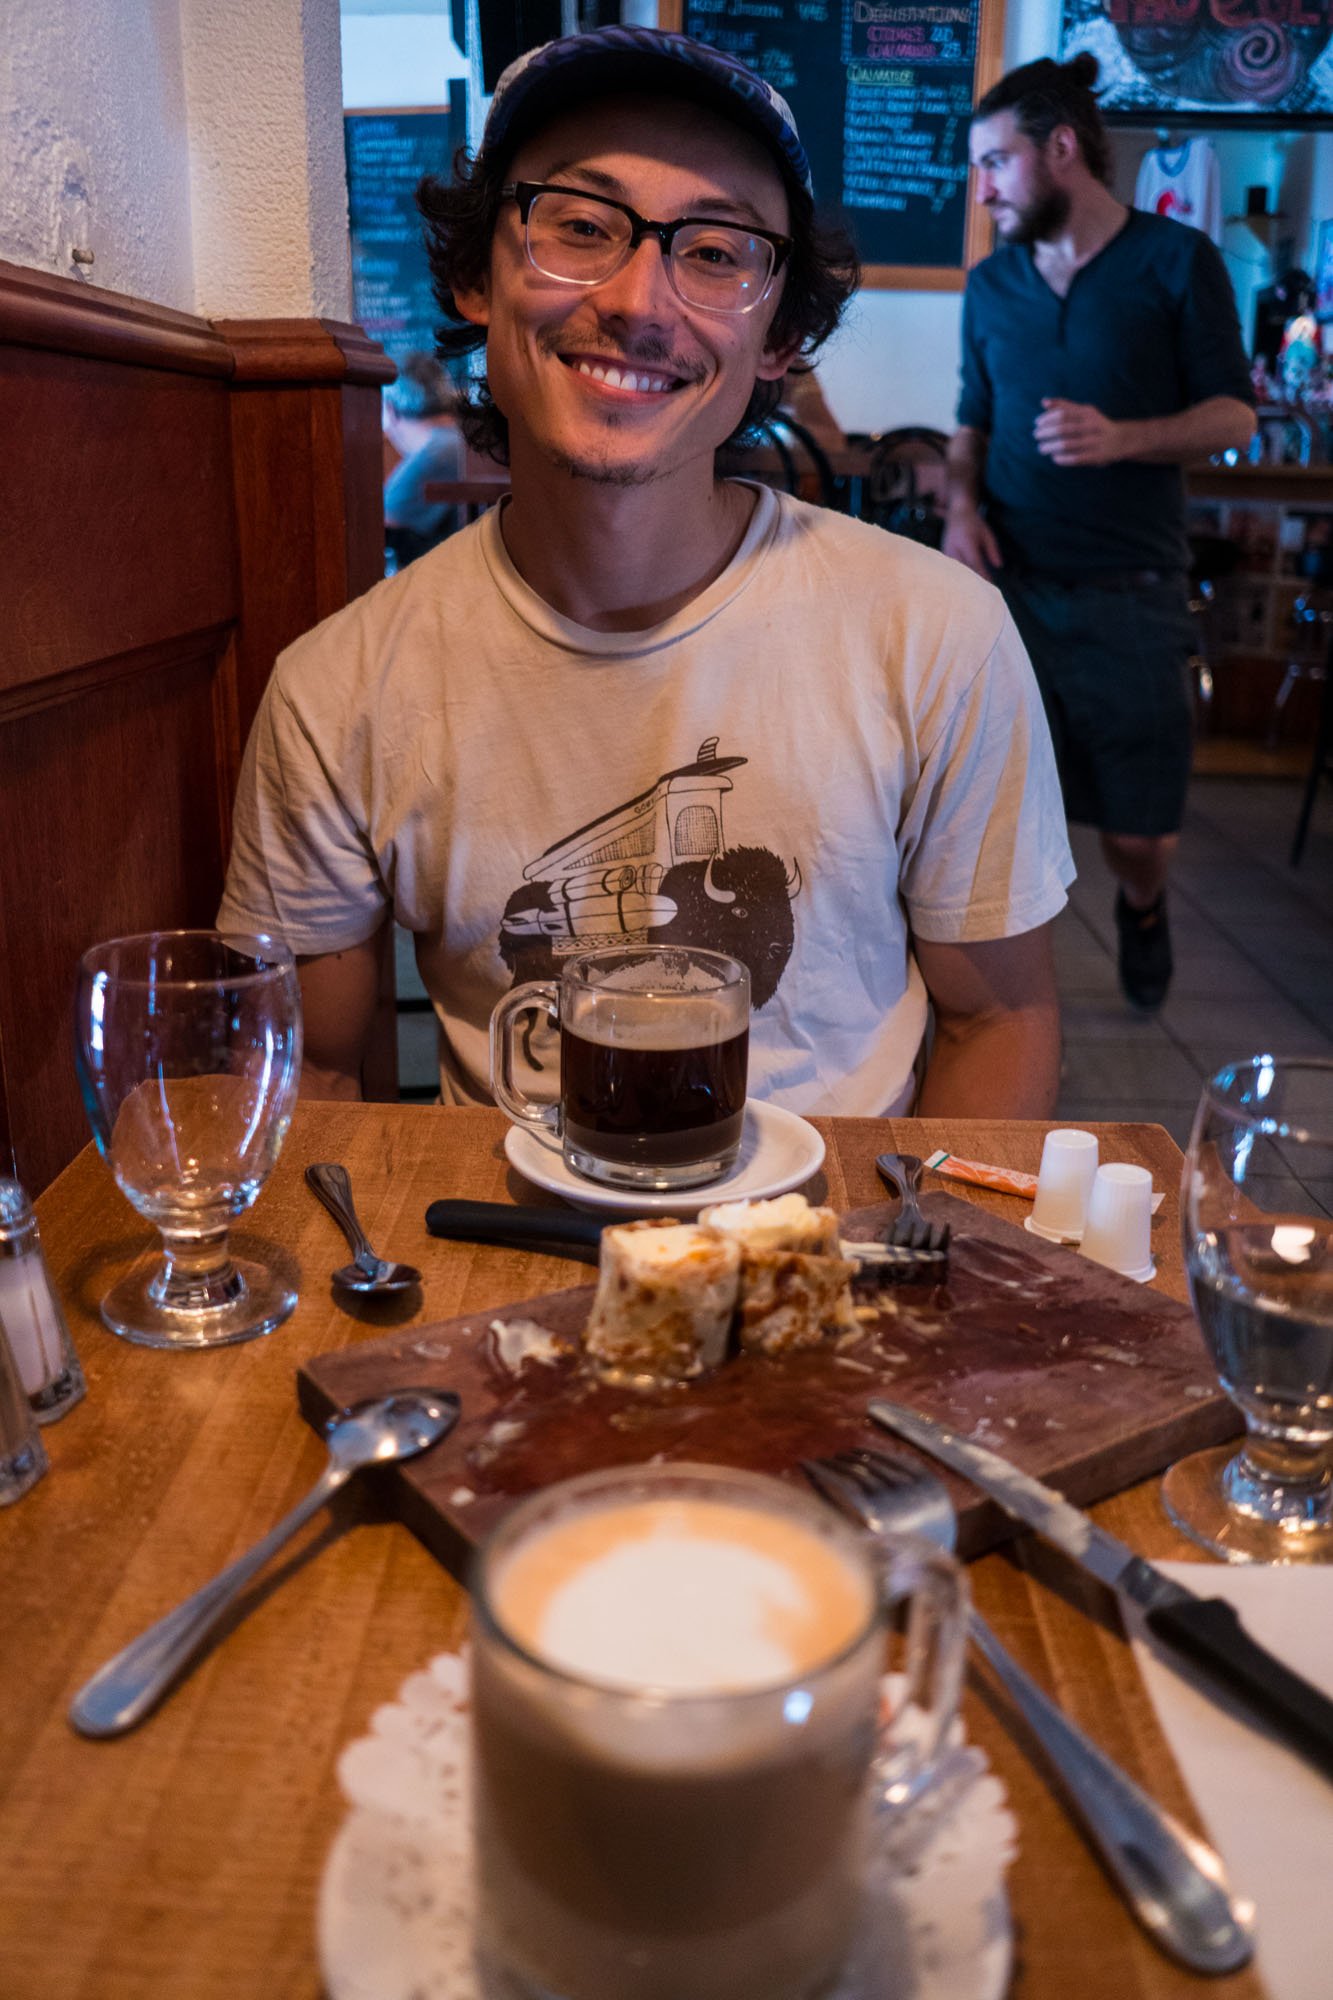  Owen enjoying our first Crepe and Latte in Quebec City 